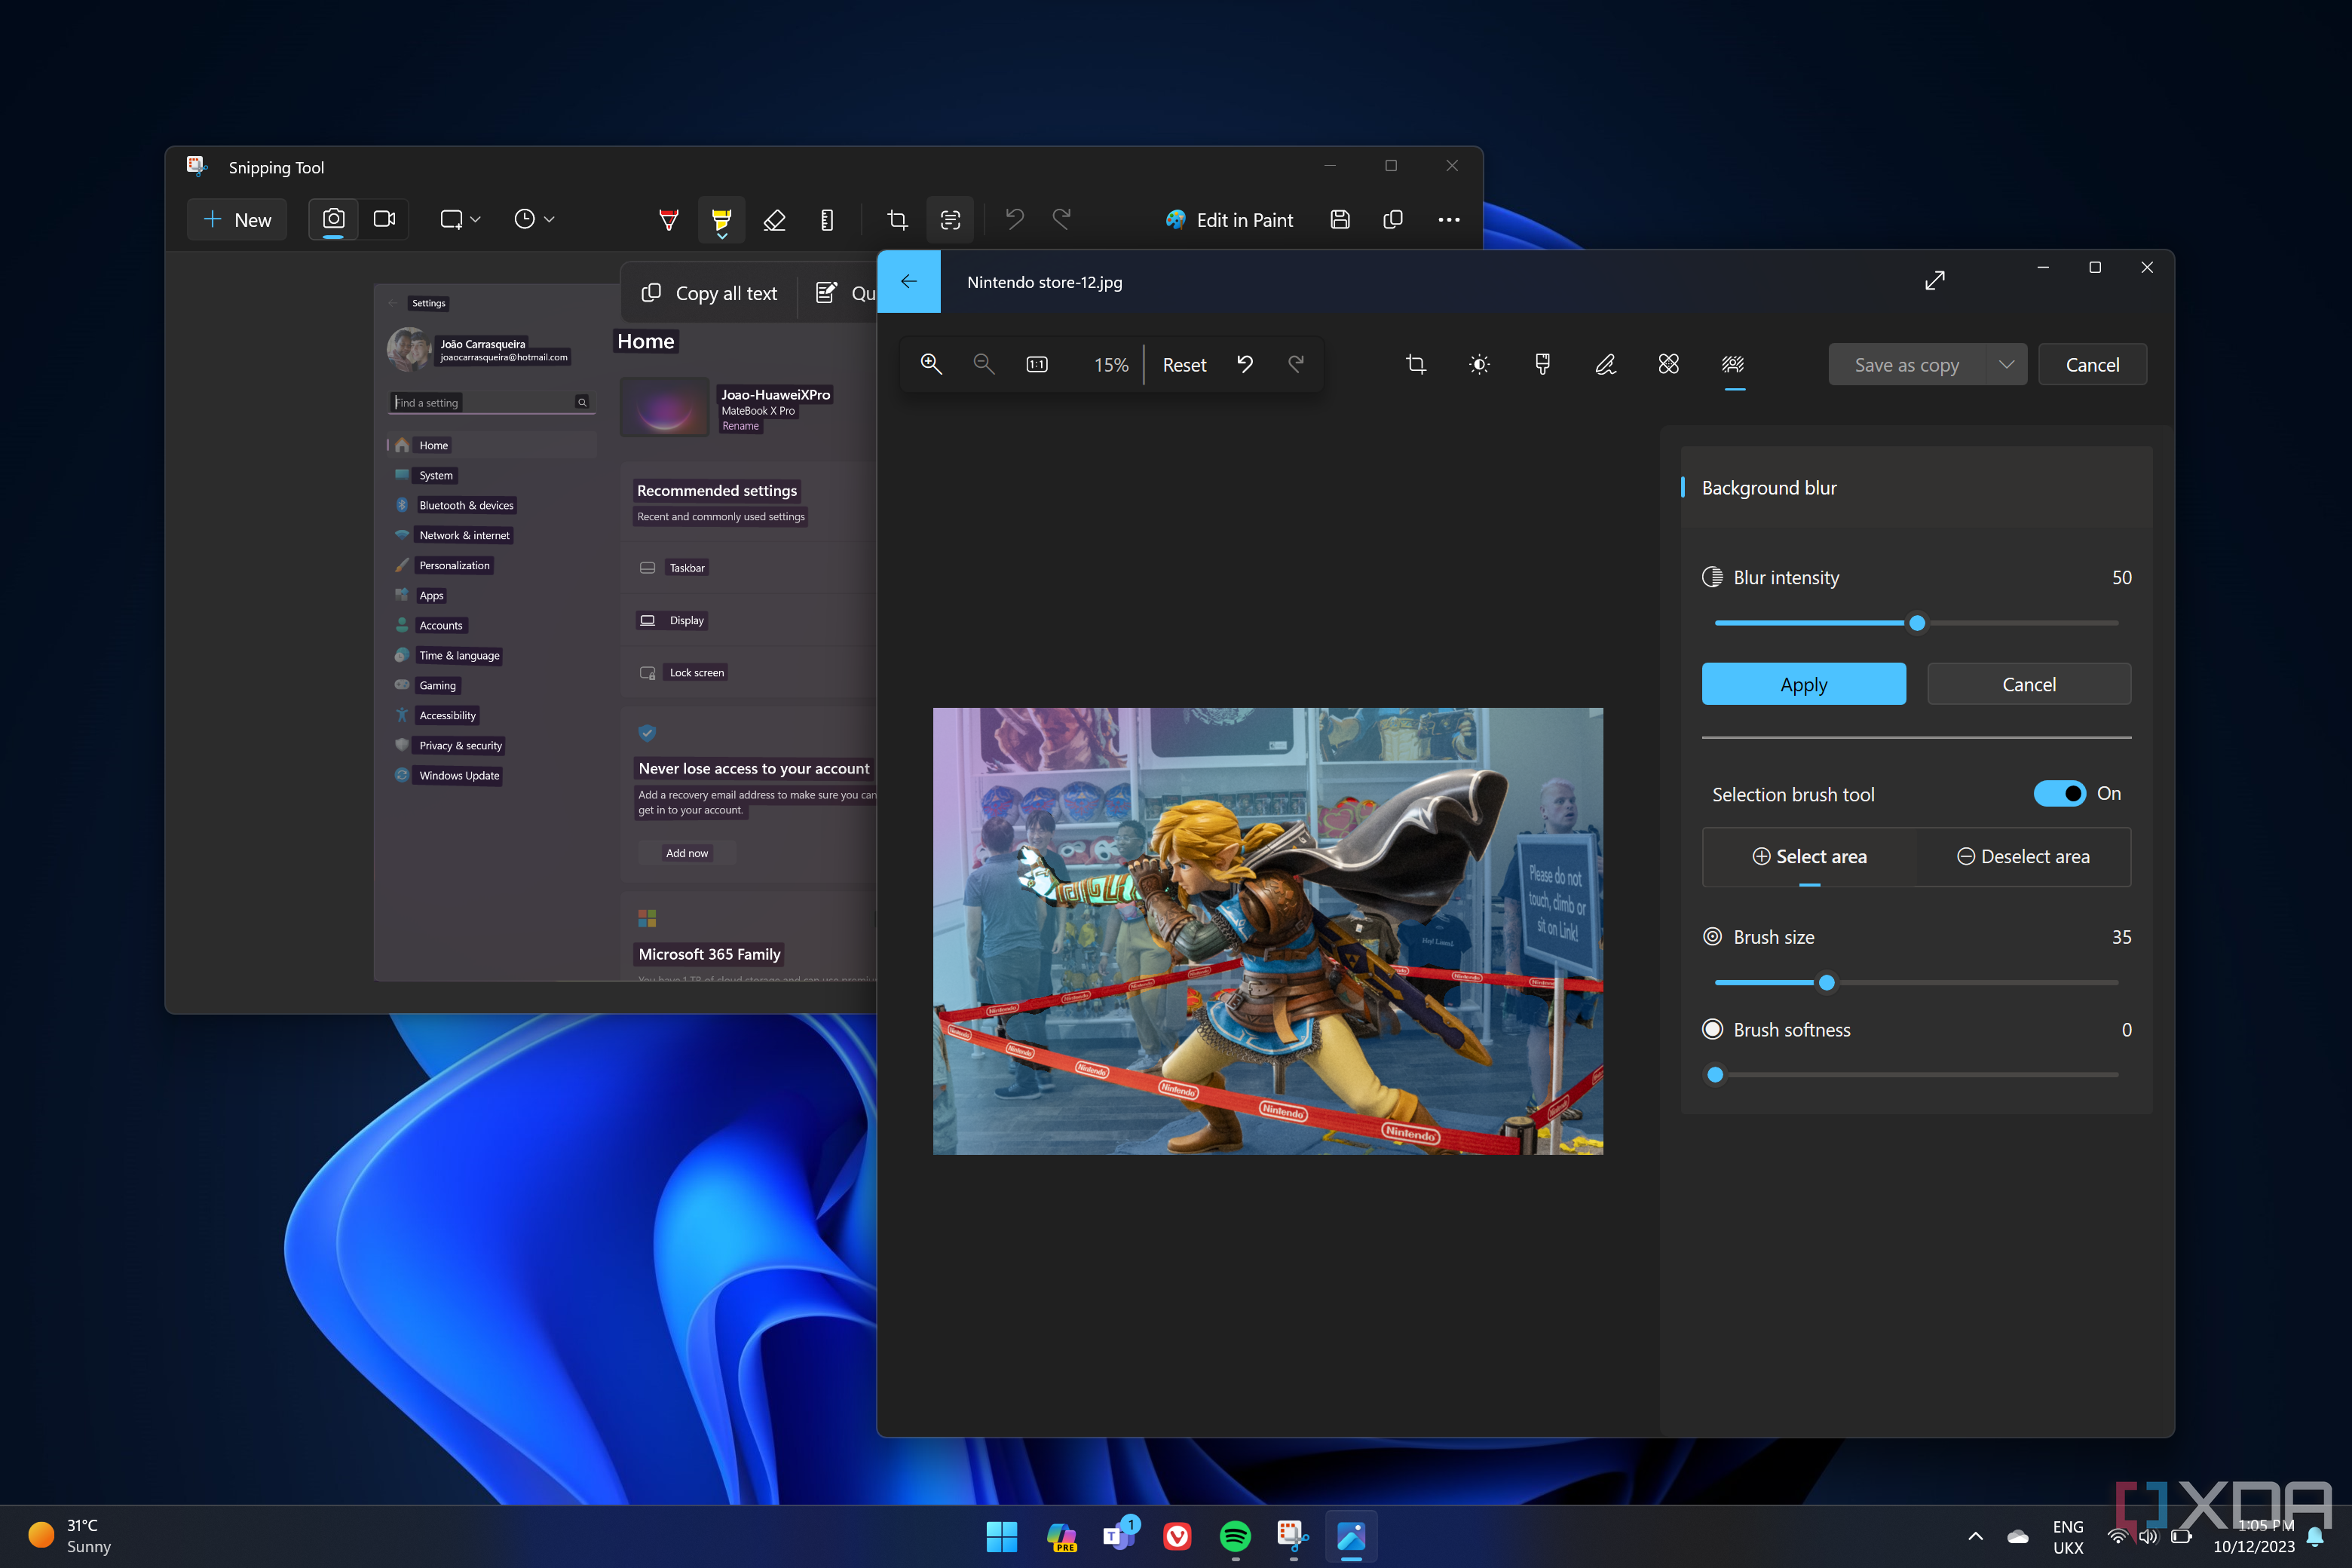 Screenshot of a Windows 11 desktop with Snipping Tool and Photos apps open. Snipping Tool is showcasing text recognition, while the Photos app has background blur.